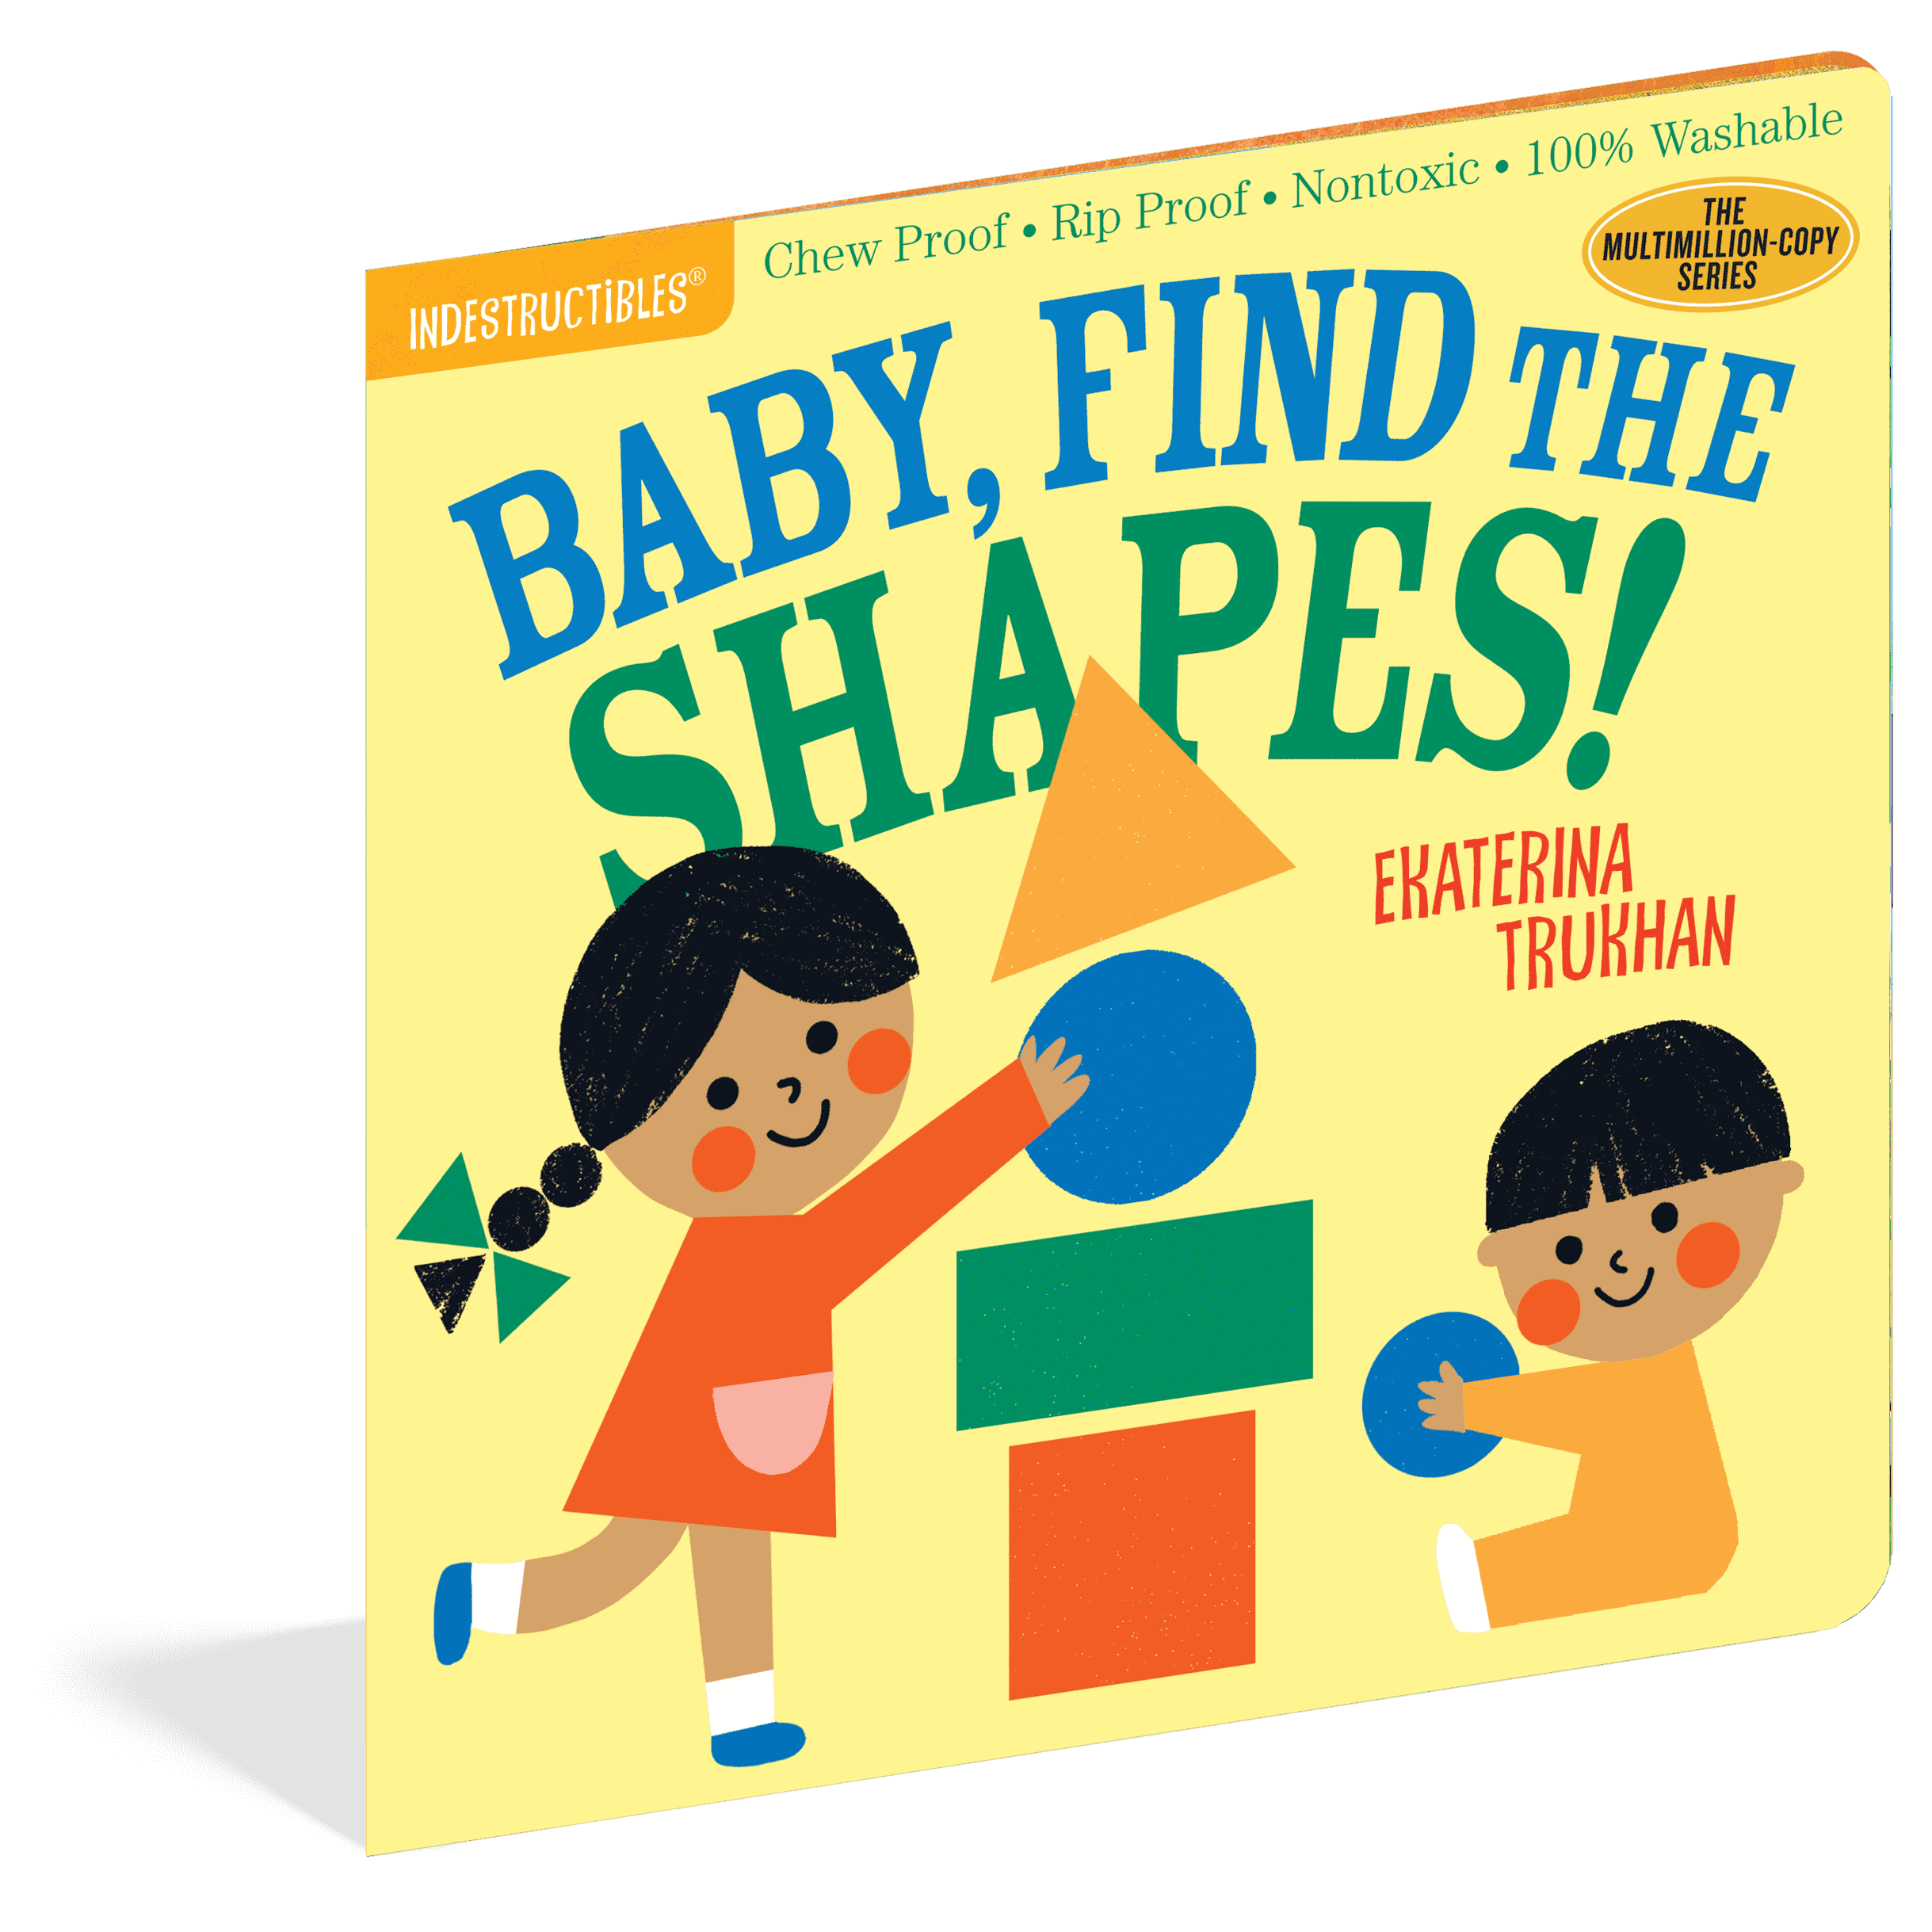 Workman Publishing-Indestructibles: Baby, Find The Shapes!-100624-Legacy Toys